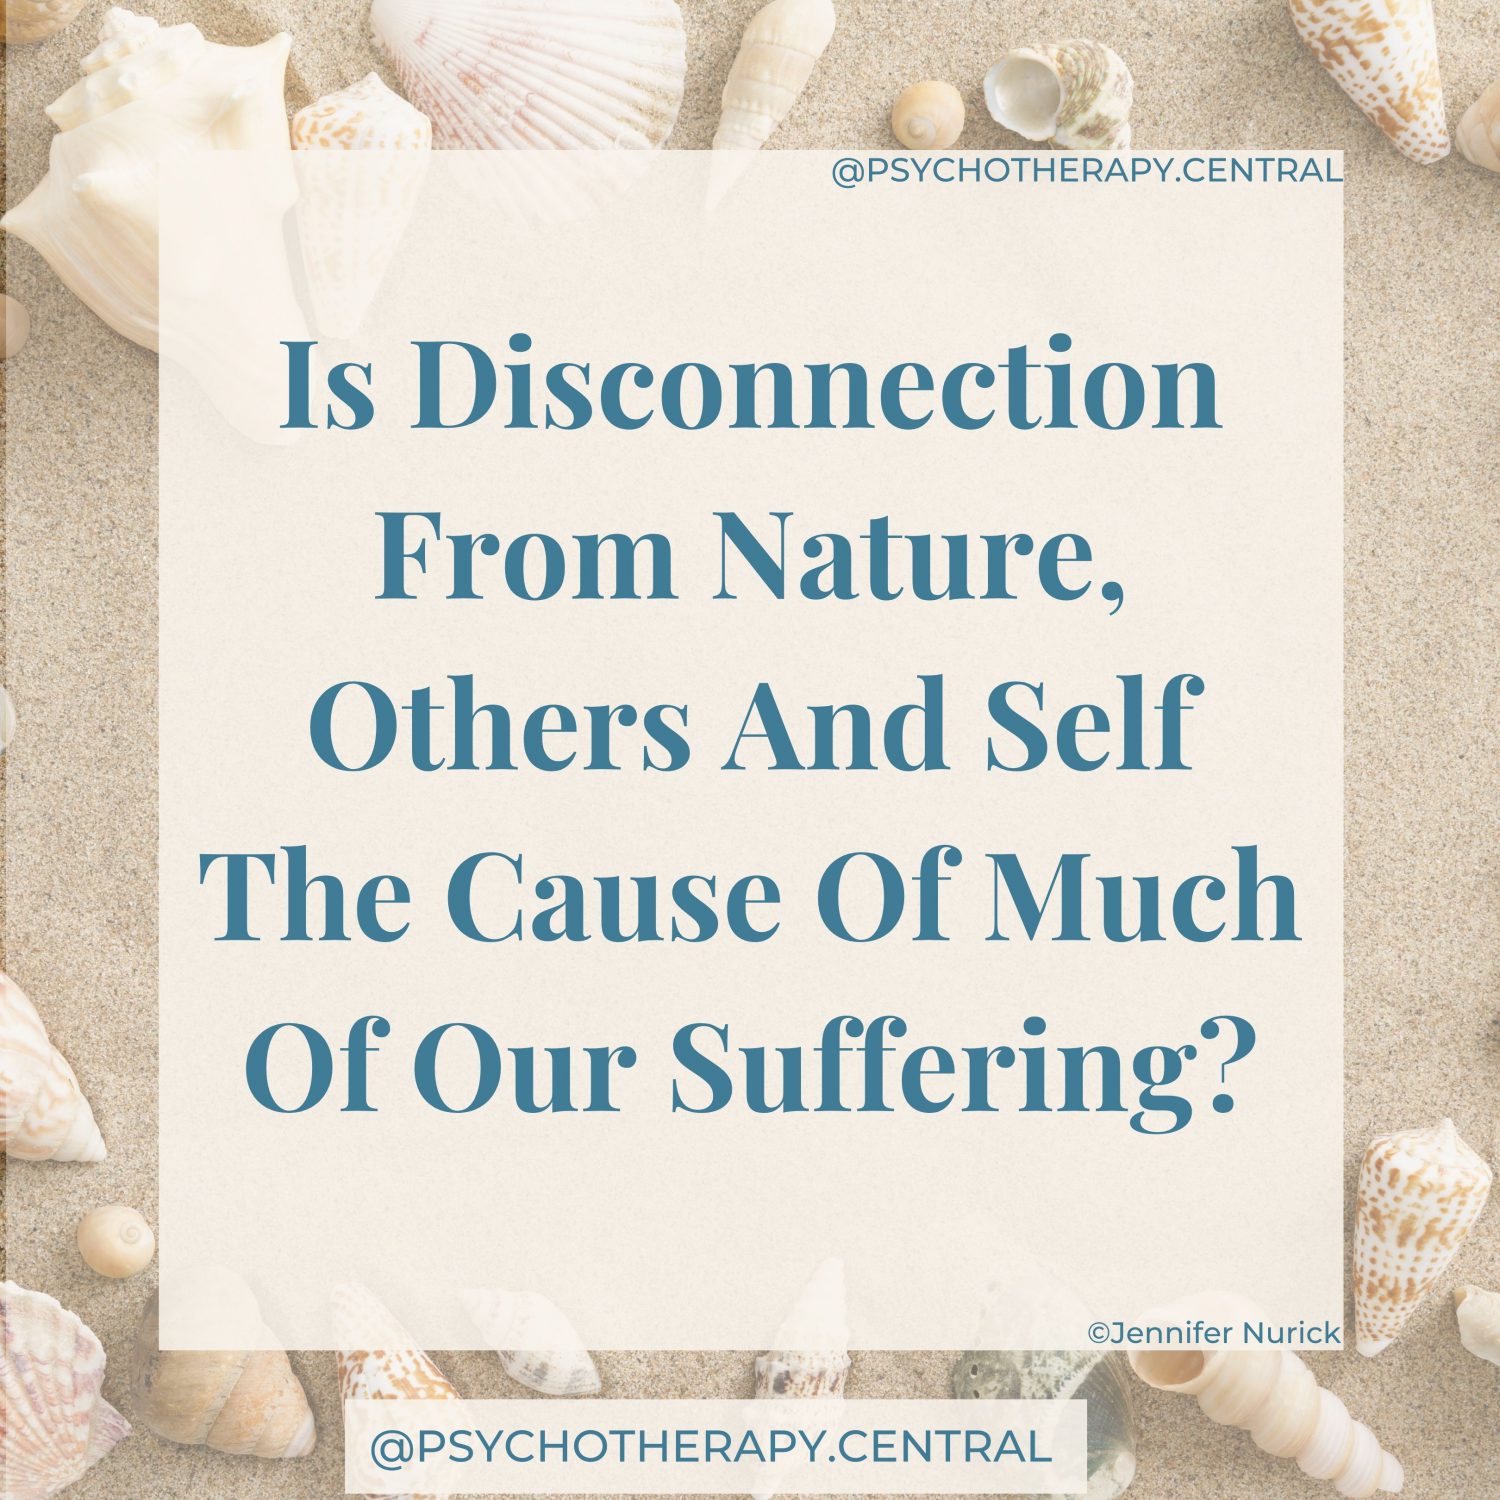 s Disconnection From Nature, Others And Self The Cause Of Much Of Our Suffering?